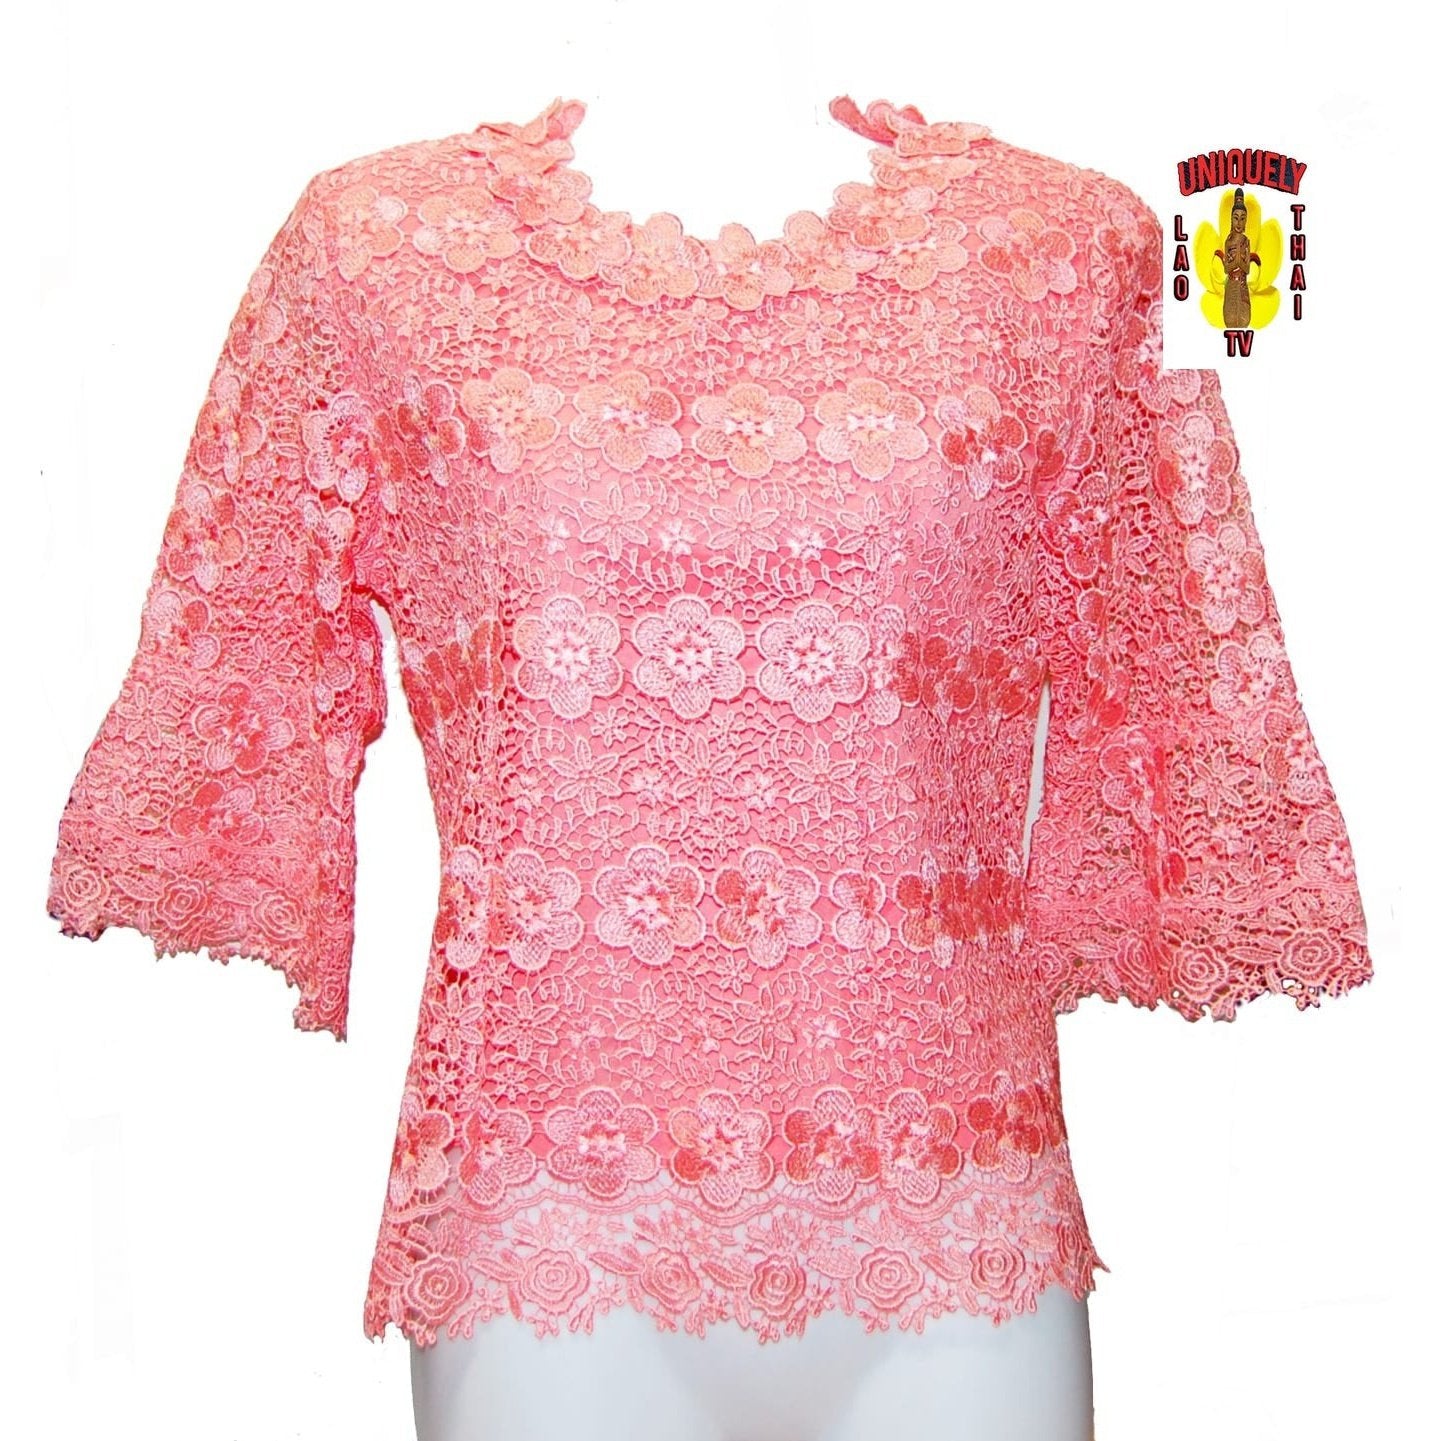 Traditional Thai Laos Lace Blouse Deep Pink